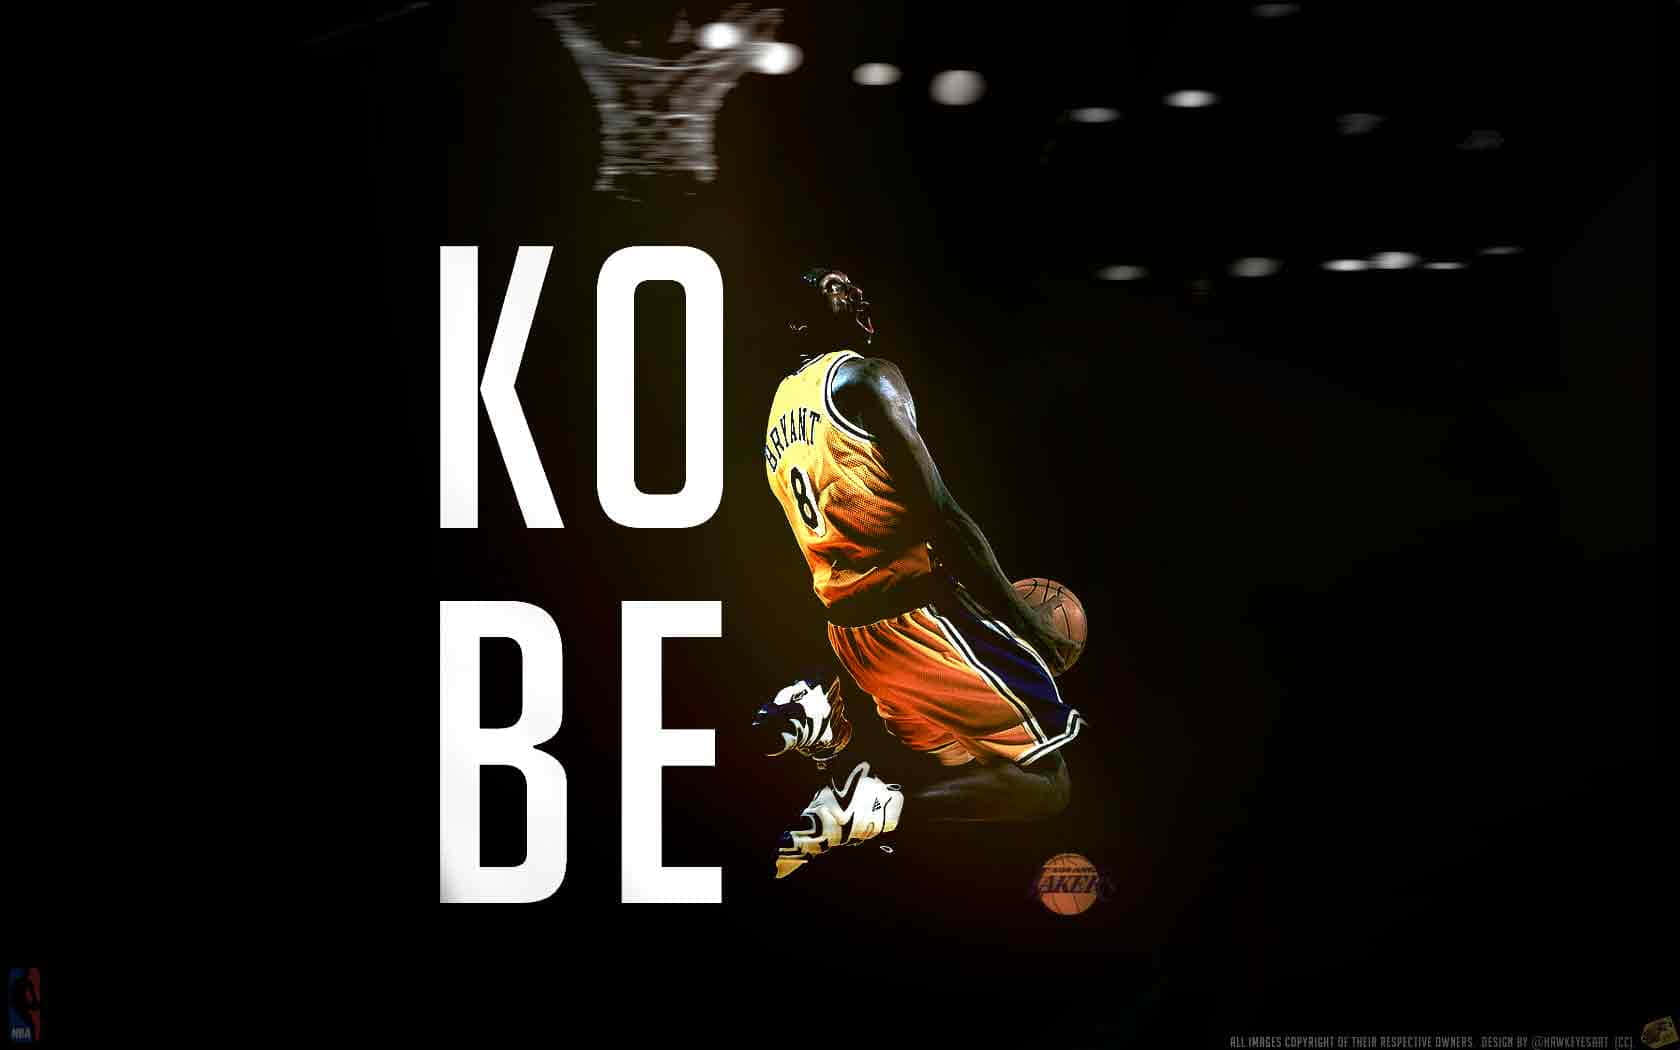 "Take That Last Shot With Mamba Out - Make The Most Of Every Opportunity" Wallpaper